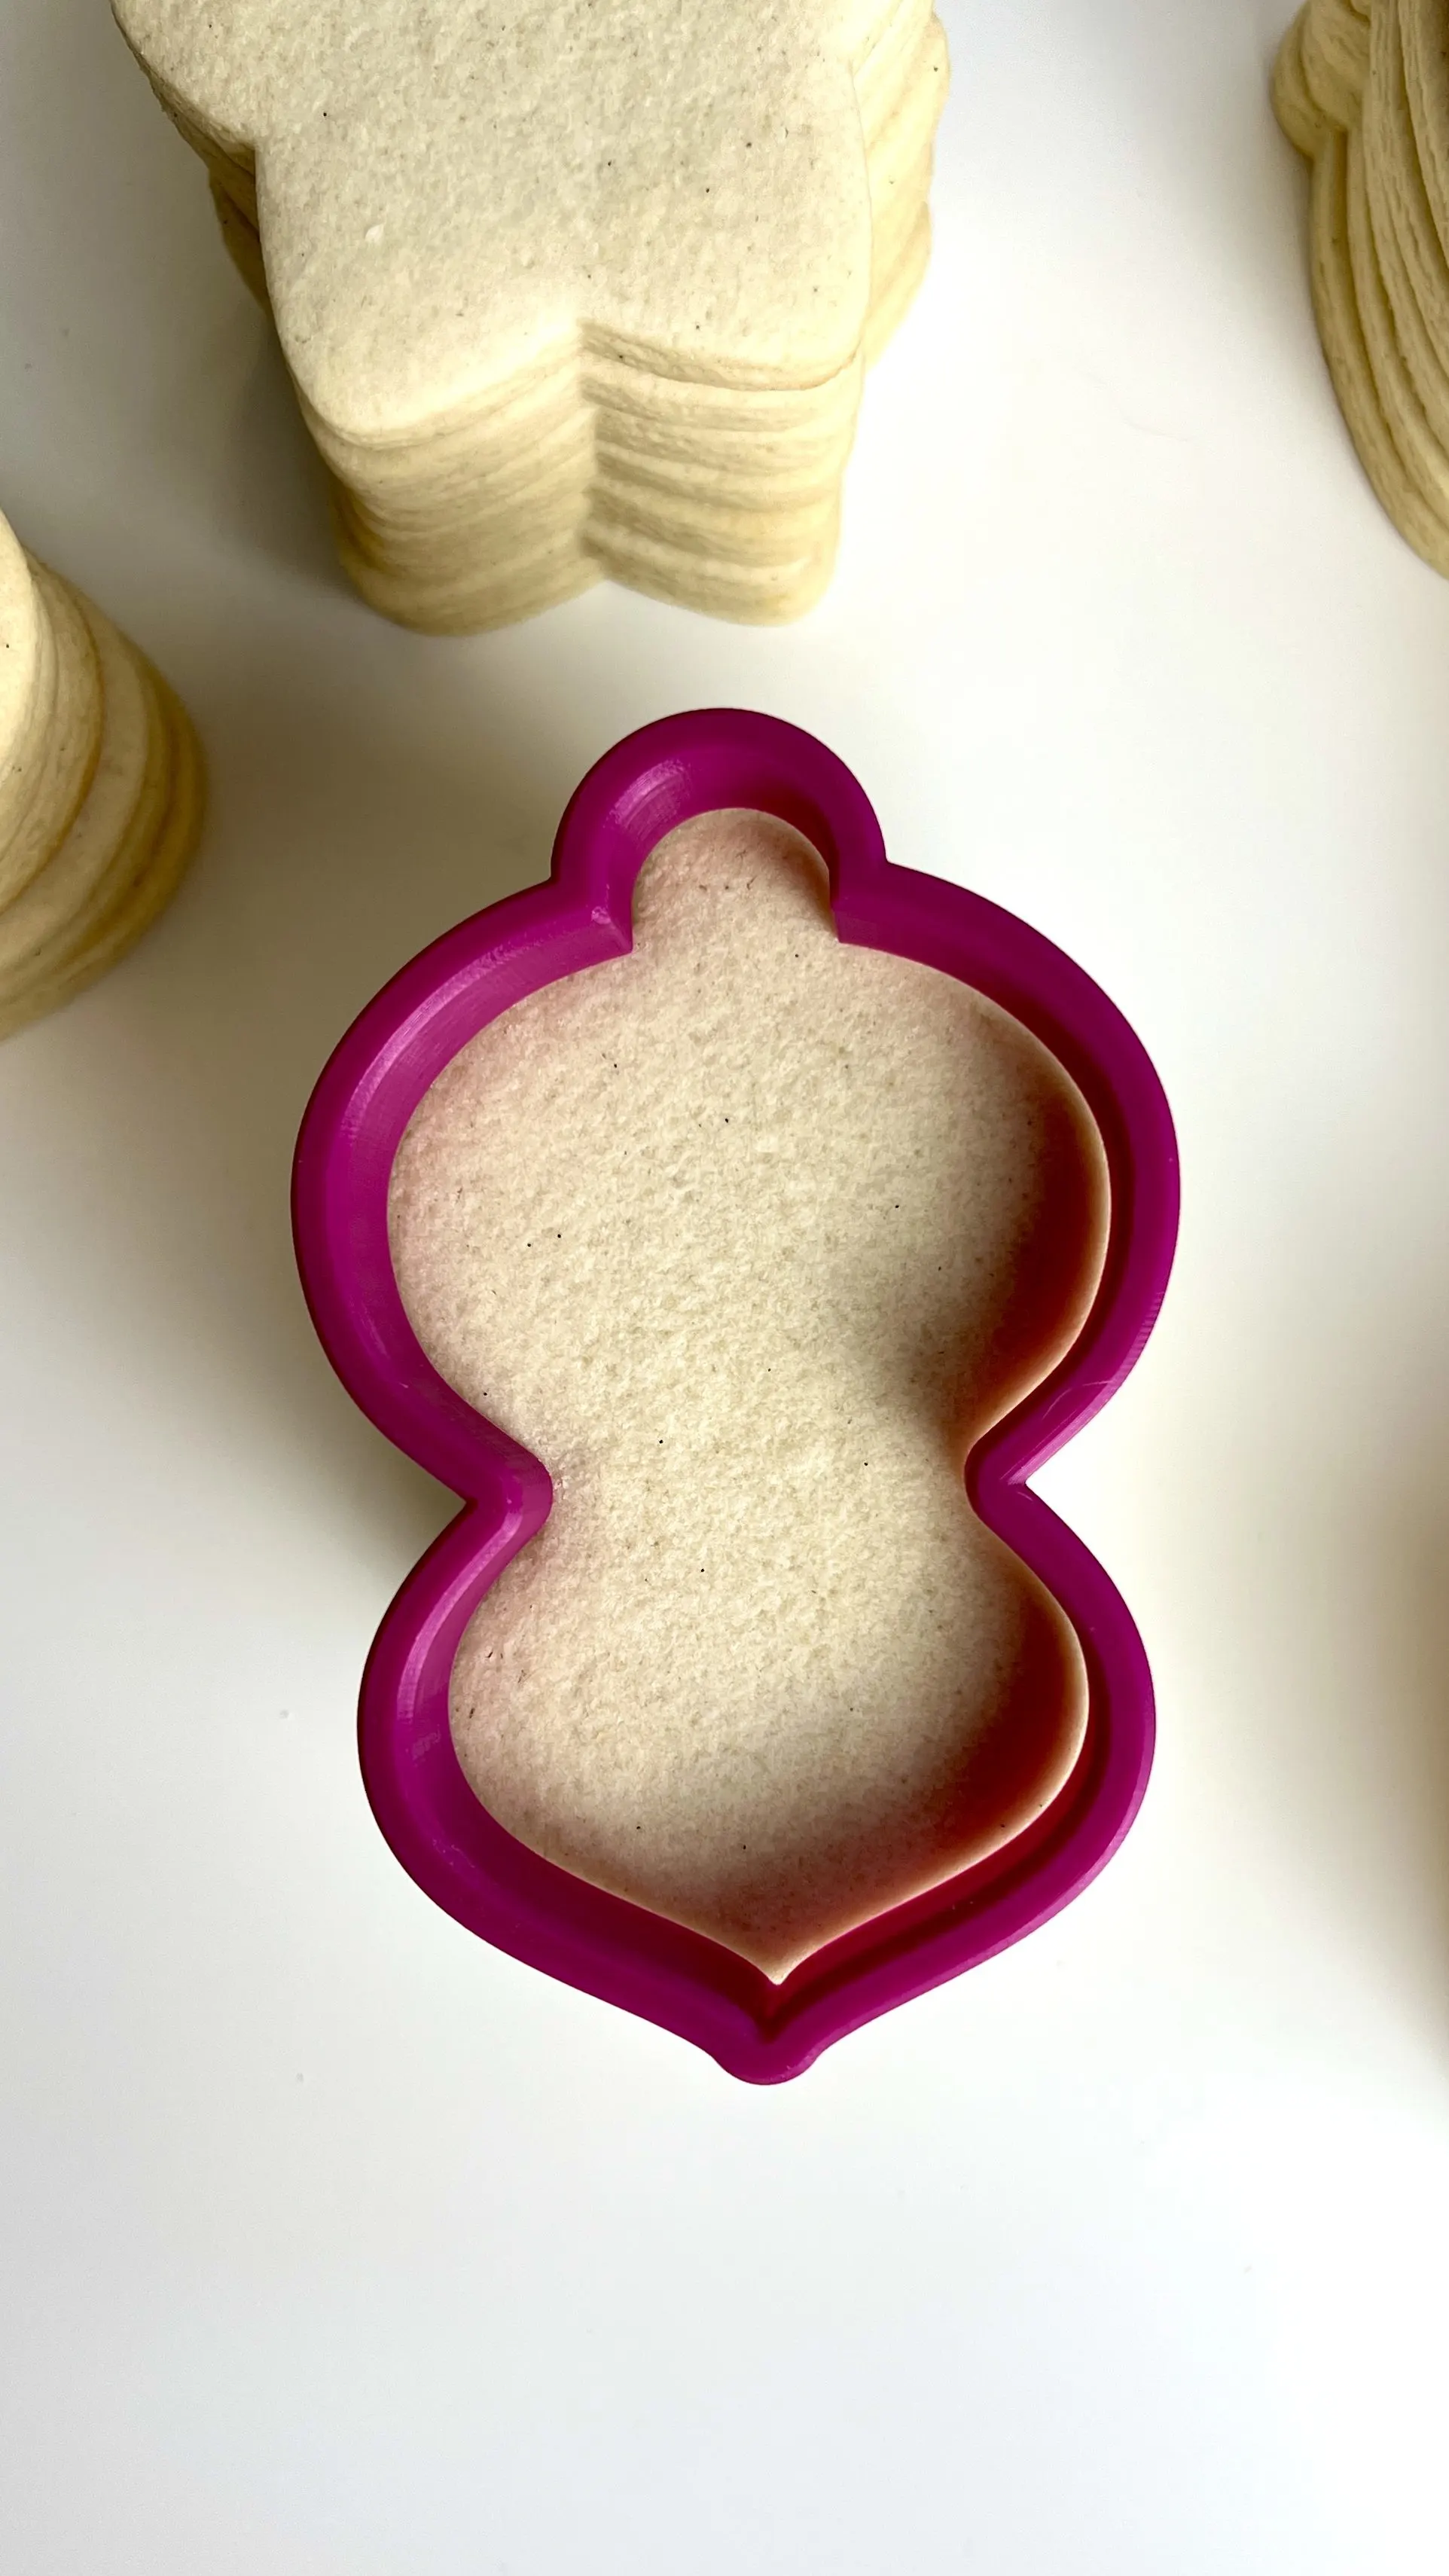 Cookie cutter on top of freshly baked sugar cookies to show no spread